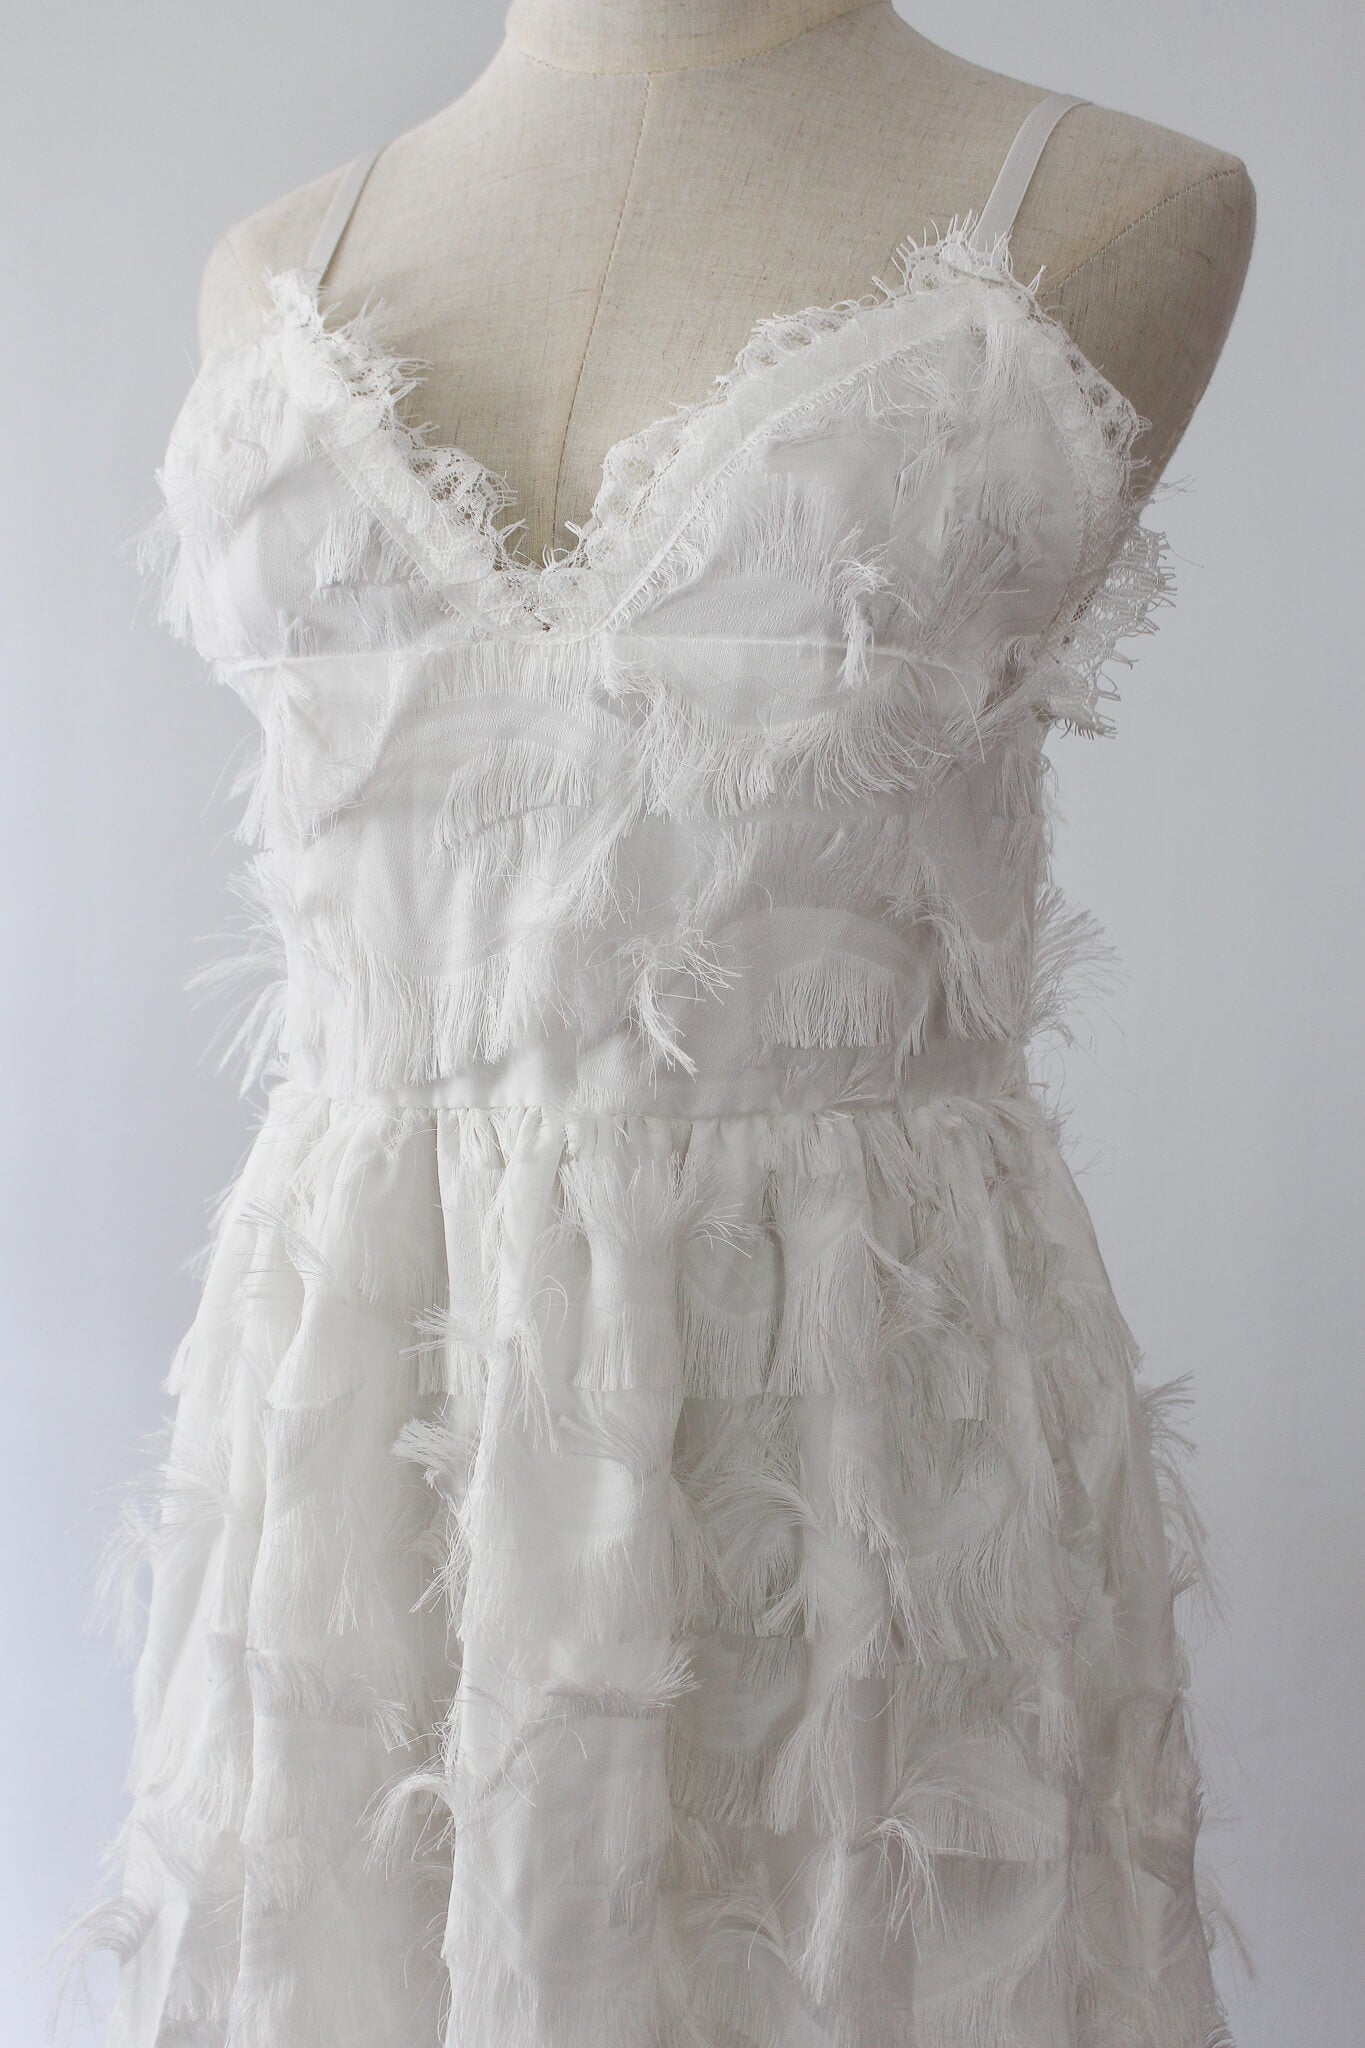 A feathery lightweight minidress with adjustable straps. Suitable for parties and date nights. 